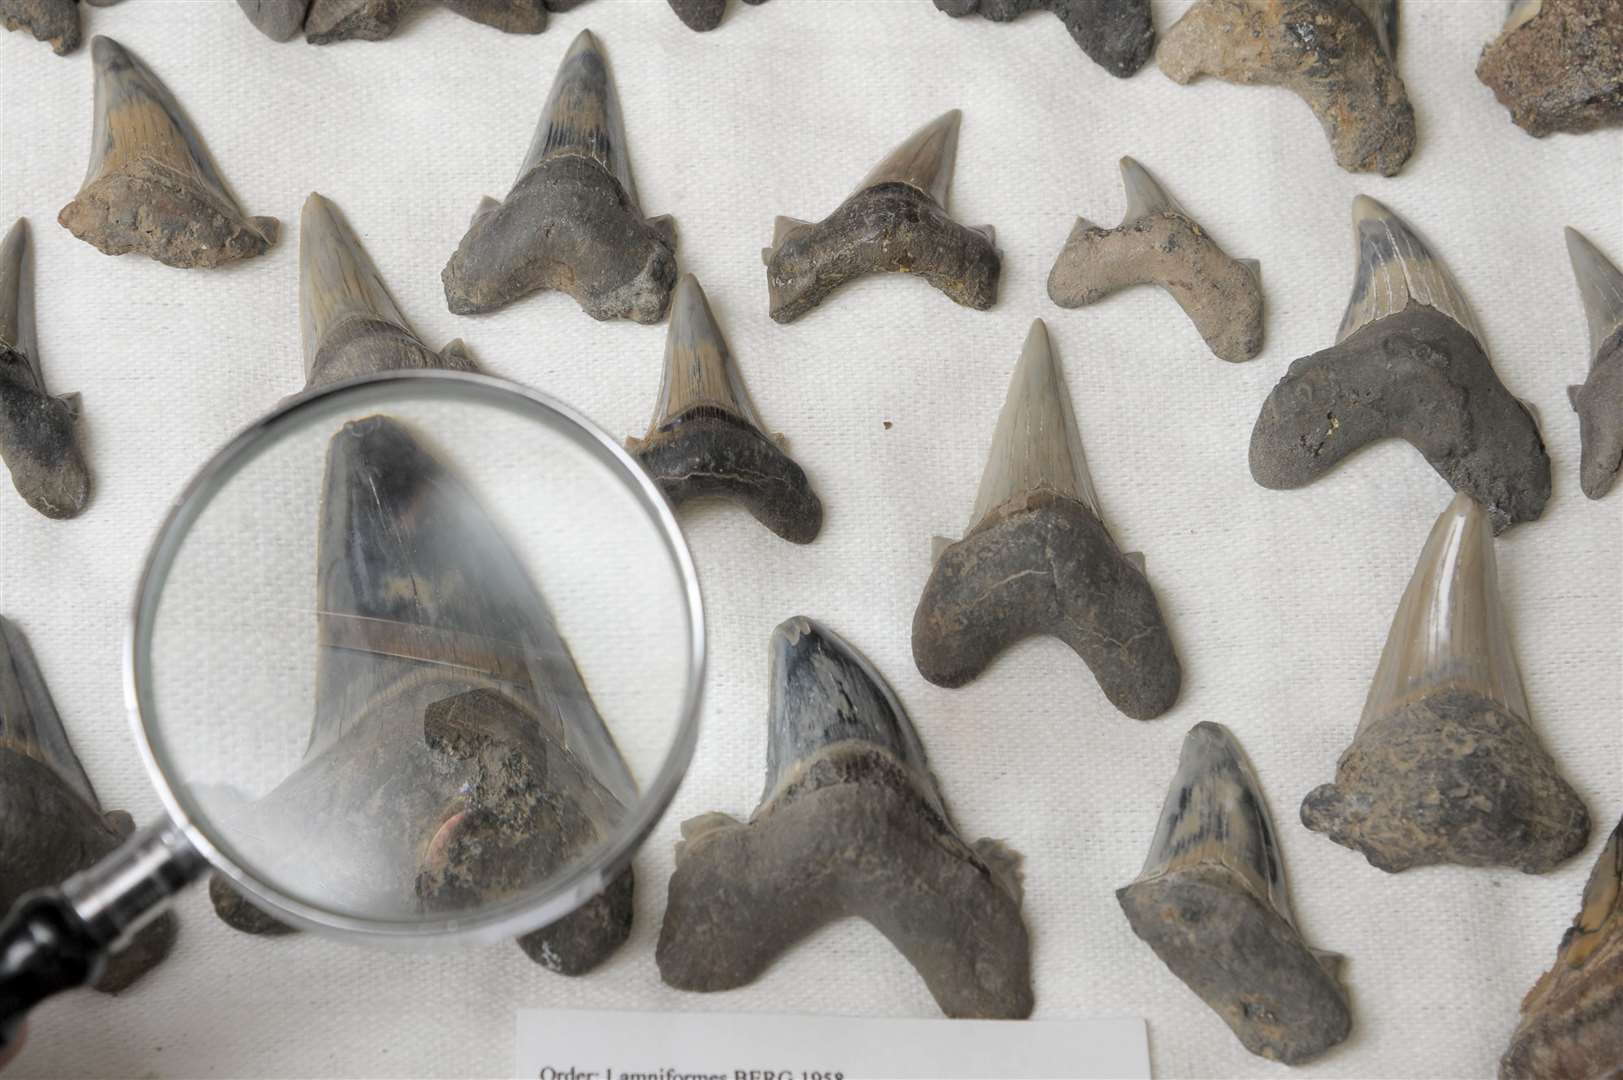 Shark teeth can be found littering many of our beaches